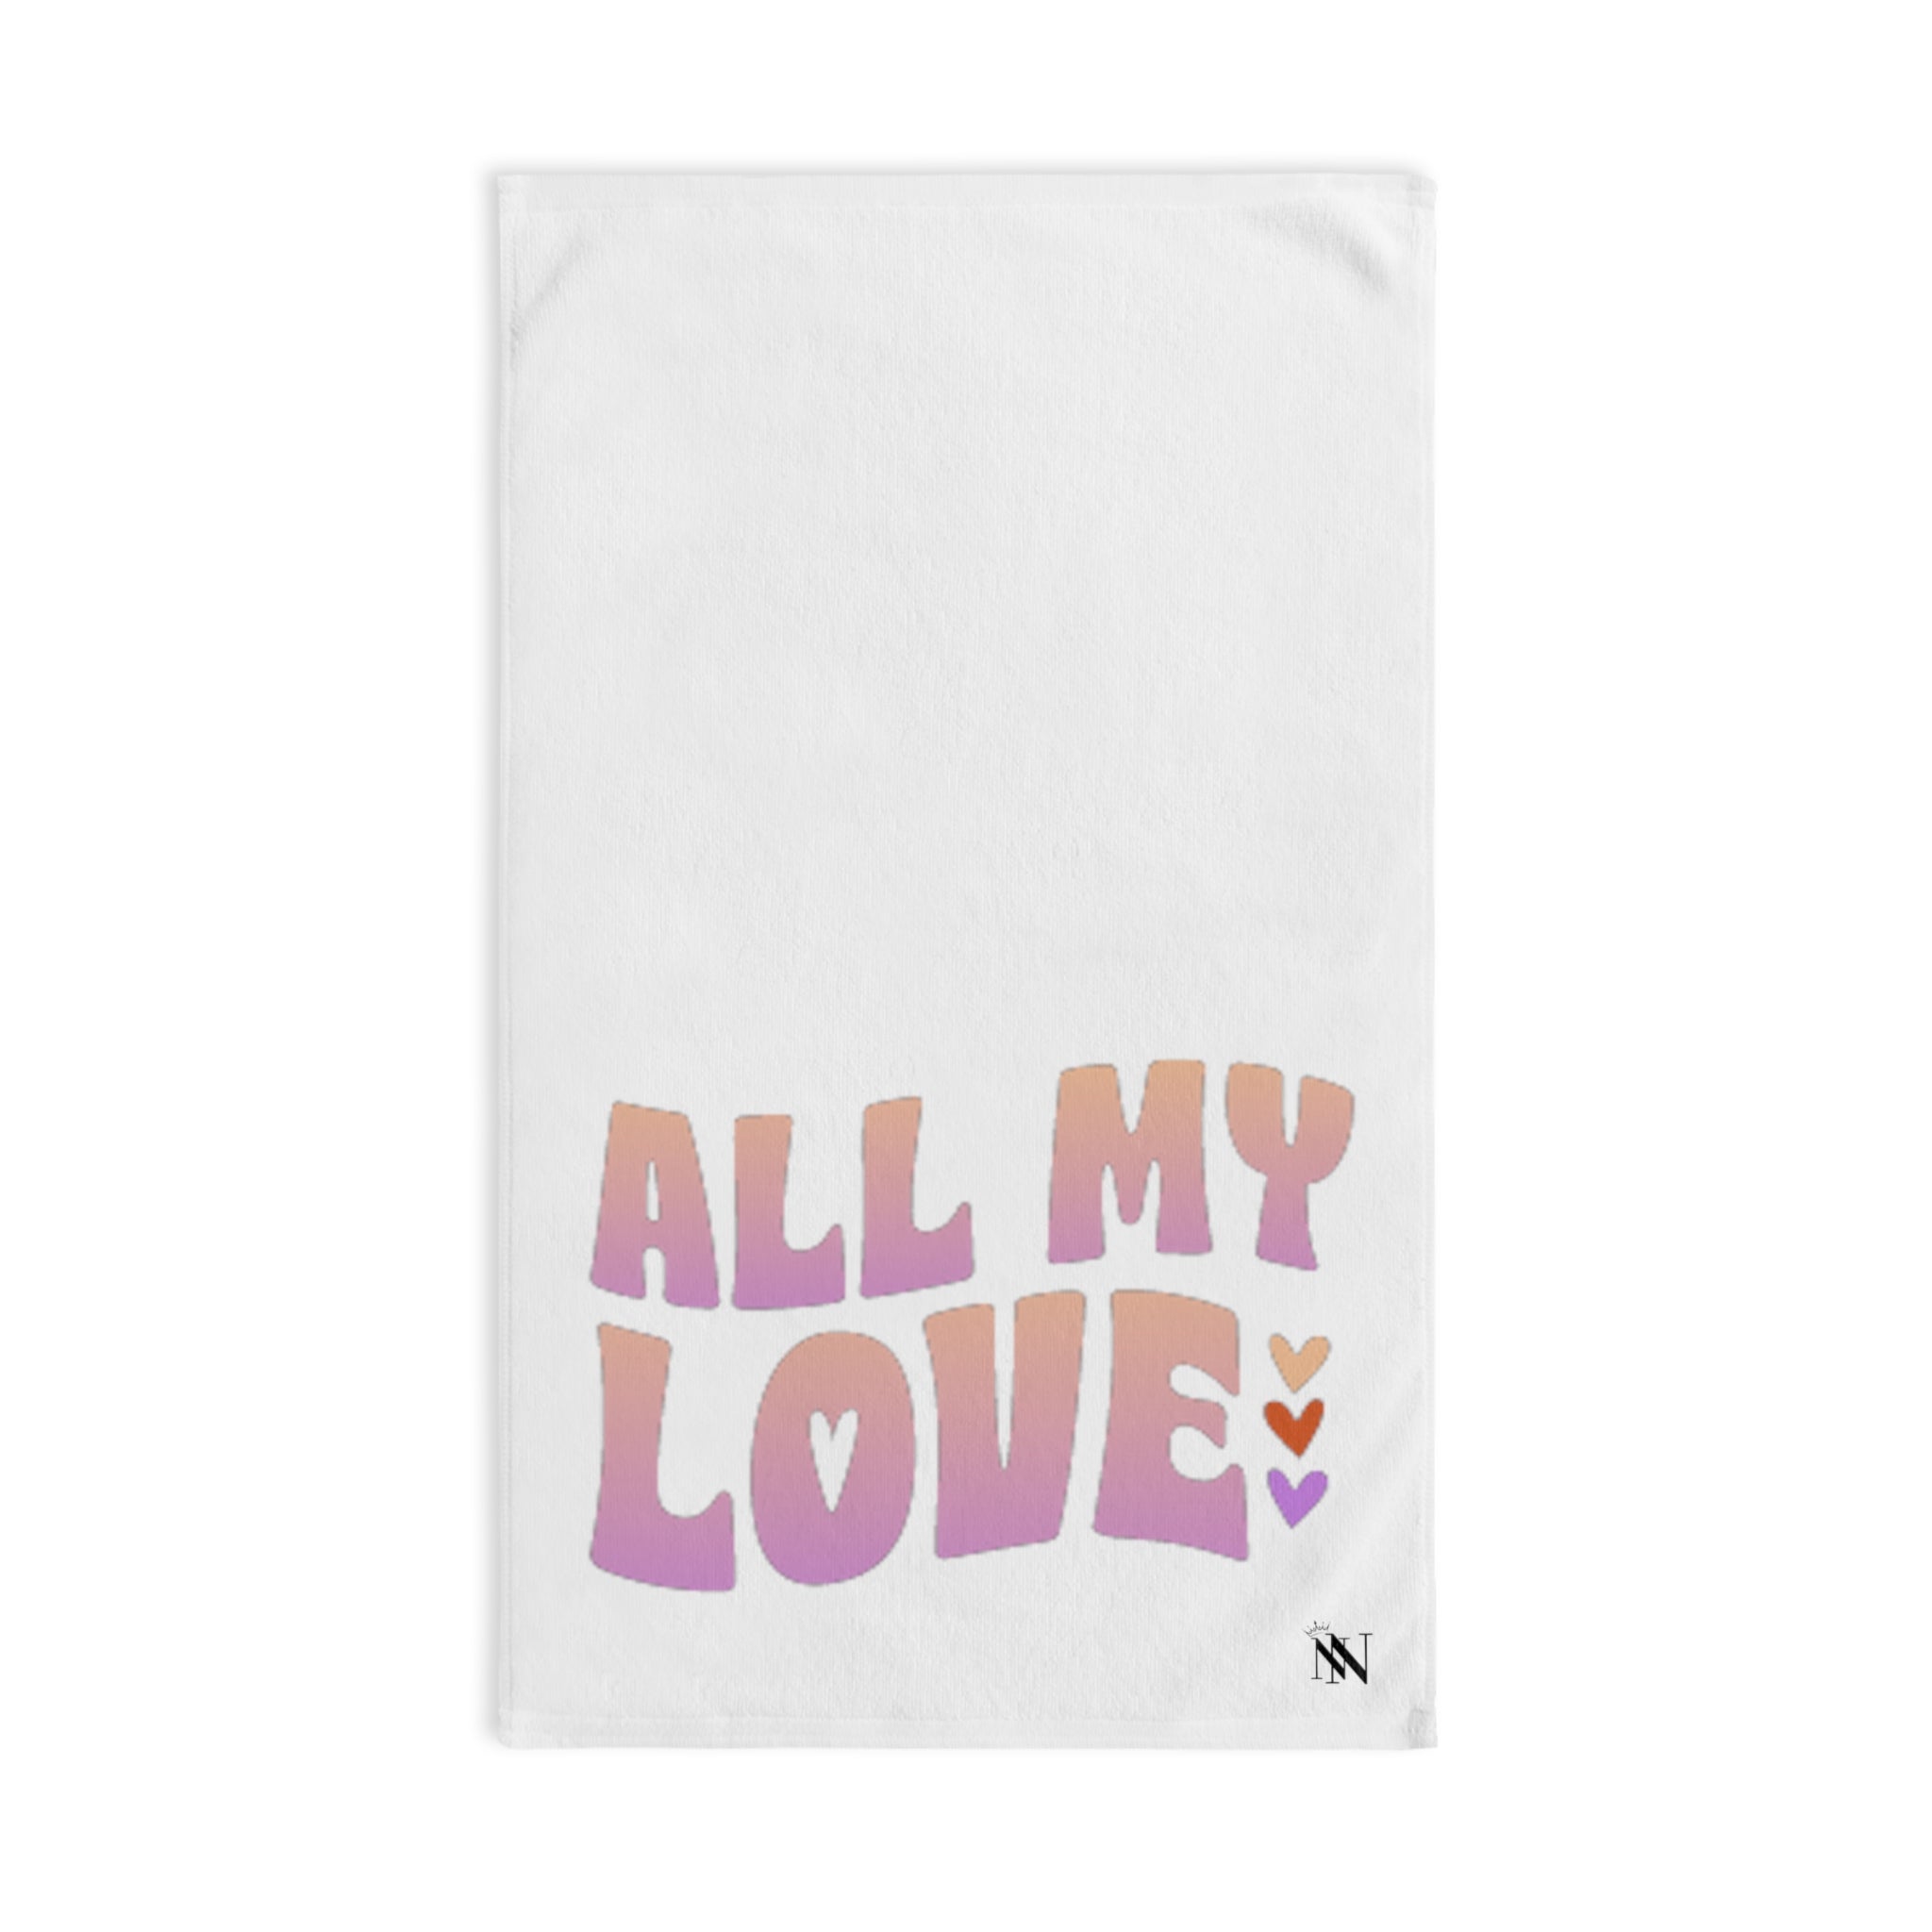 All My Love White | Funny Gifts for Men - Gifts for Him - Birthday Gifts for Men, Him, Her, Husband, Boyfriend, Girlfriend, New Couple Gifts, Fathers & Valentines Day Gifts, Christmas Gifts NECTAR NAPKINS